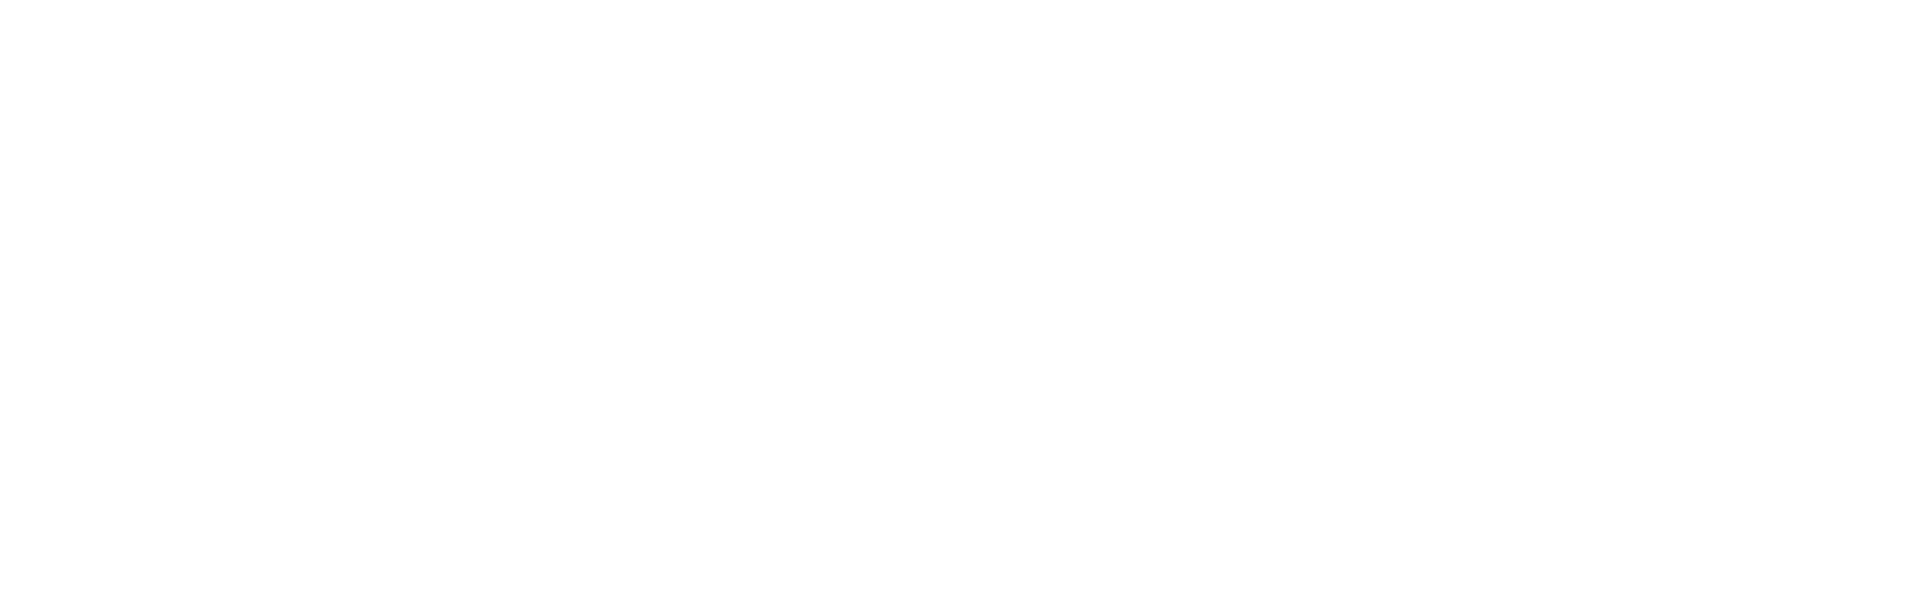 Healing Requires Precision